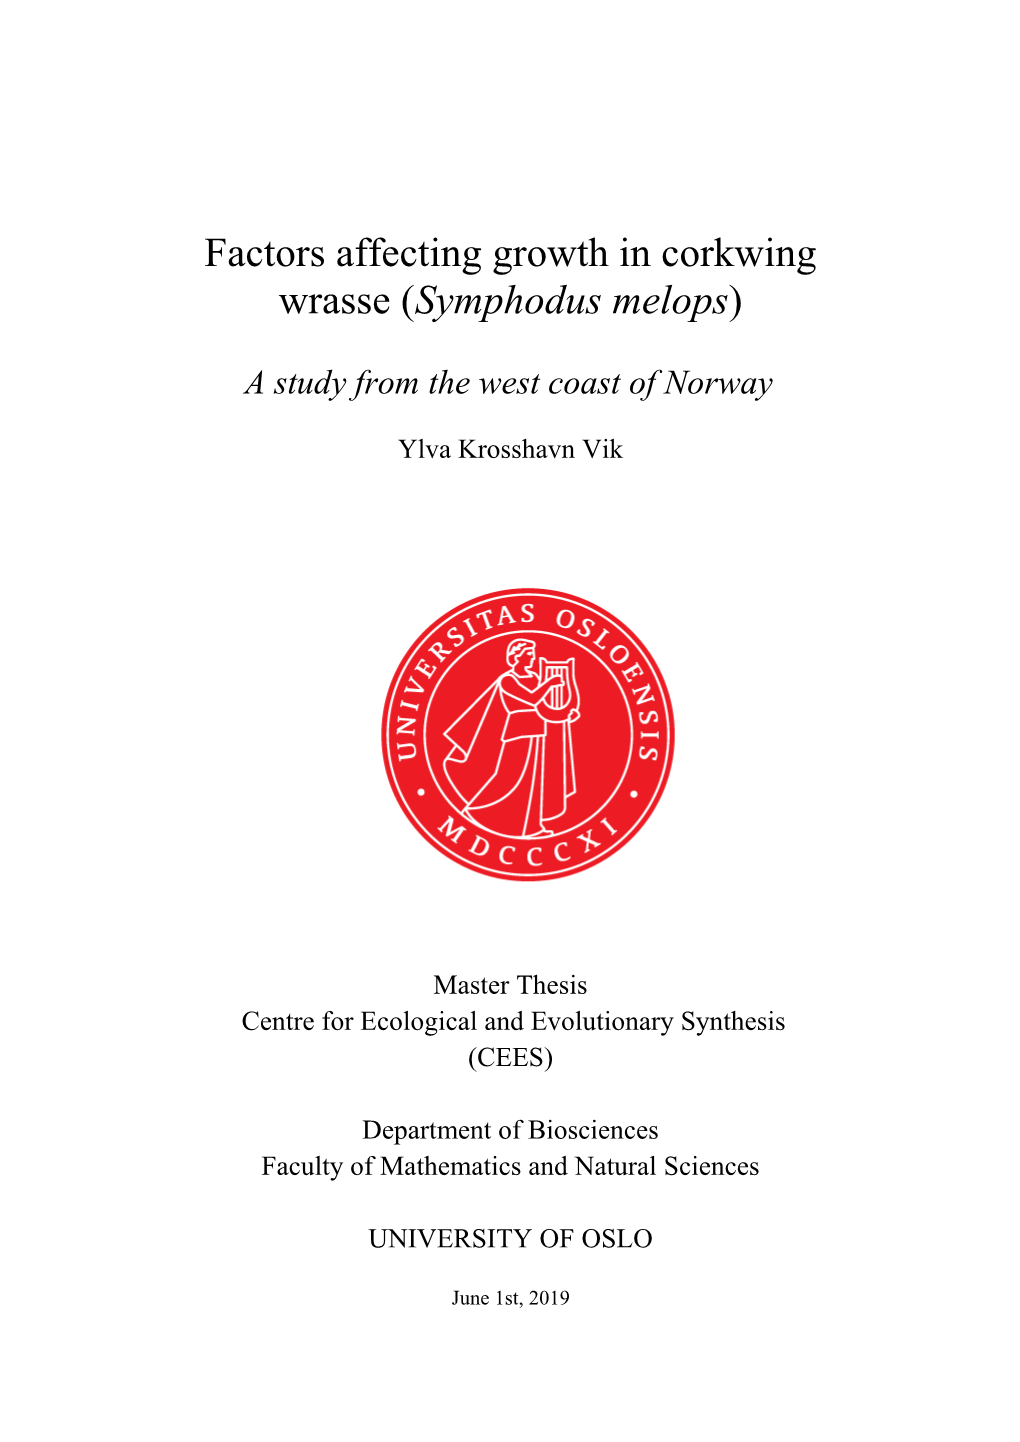 Factors Affecting Growth in Corkwing Wrasse (Symphodus Melops)